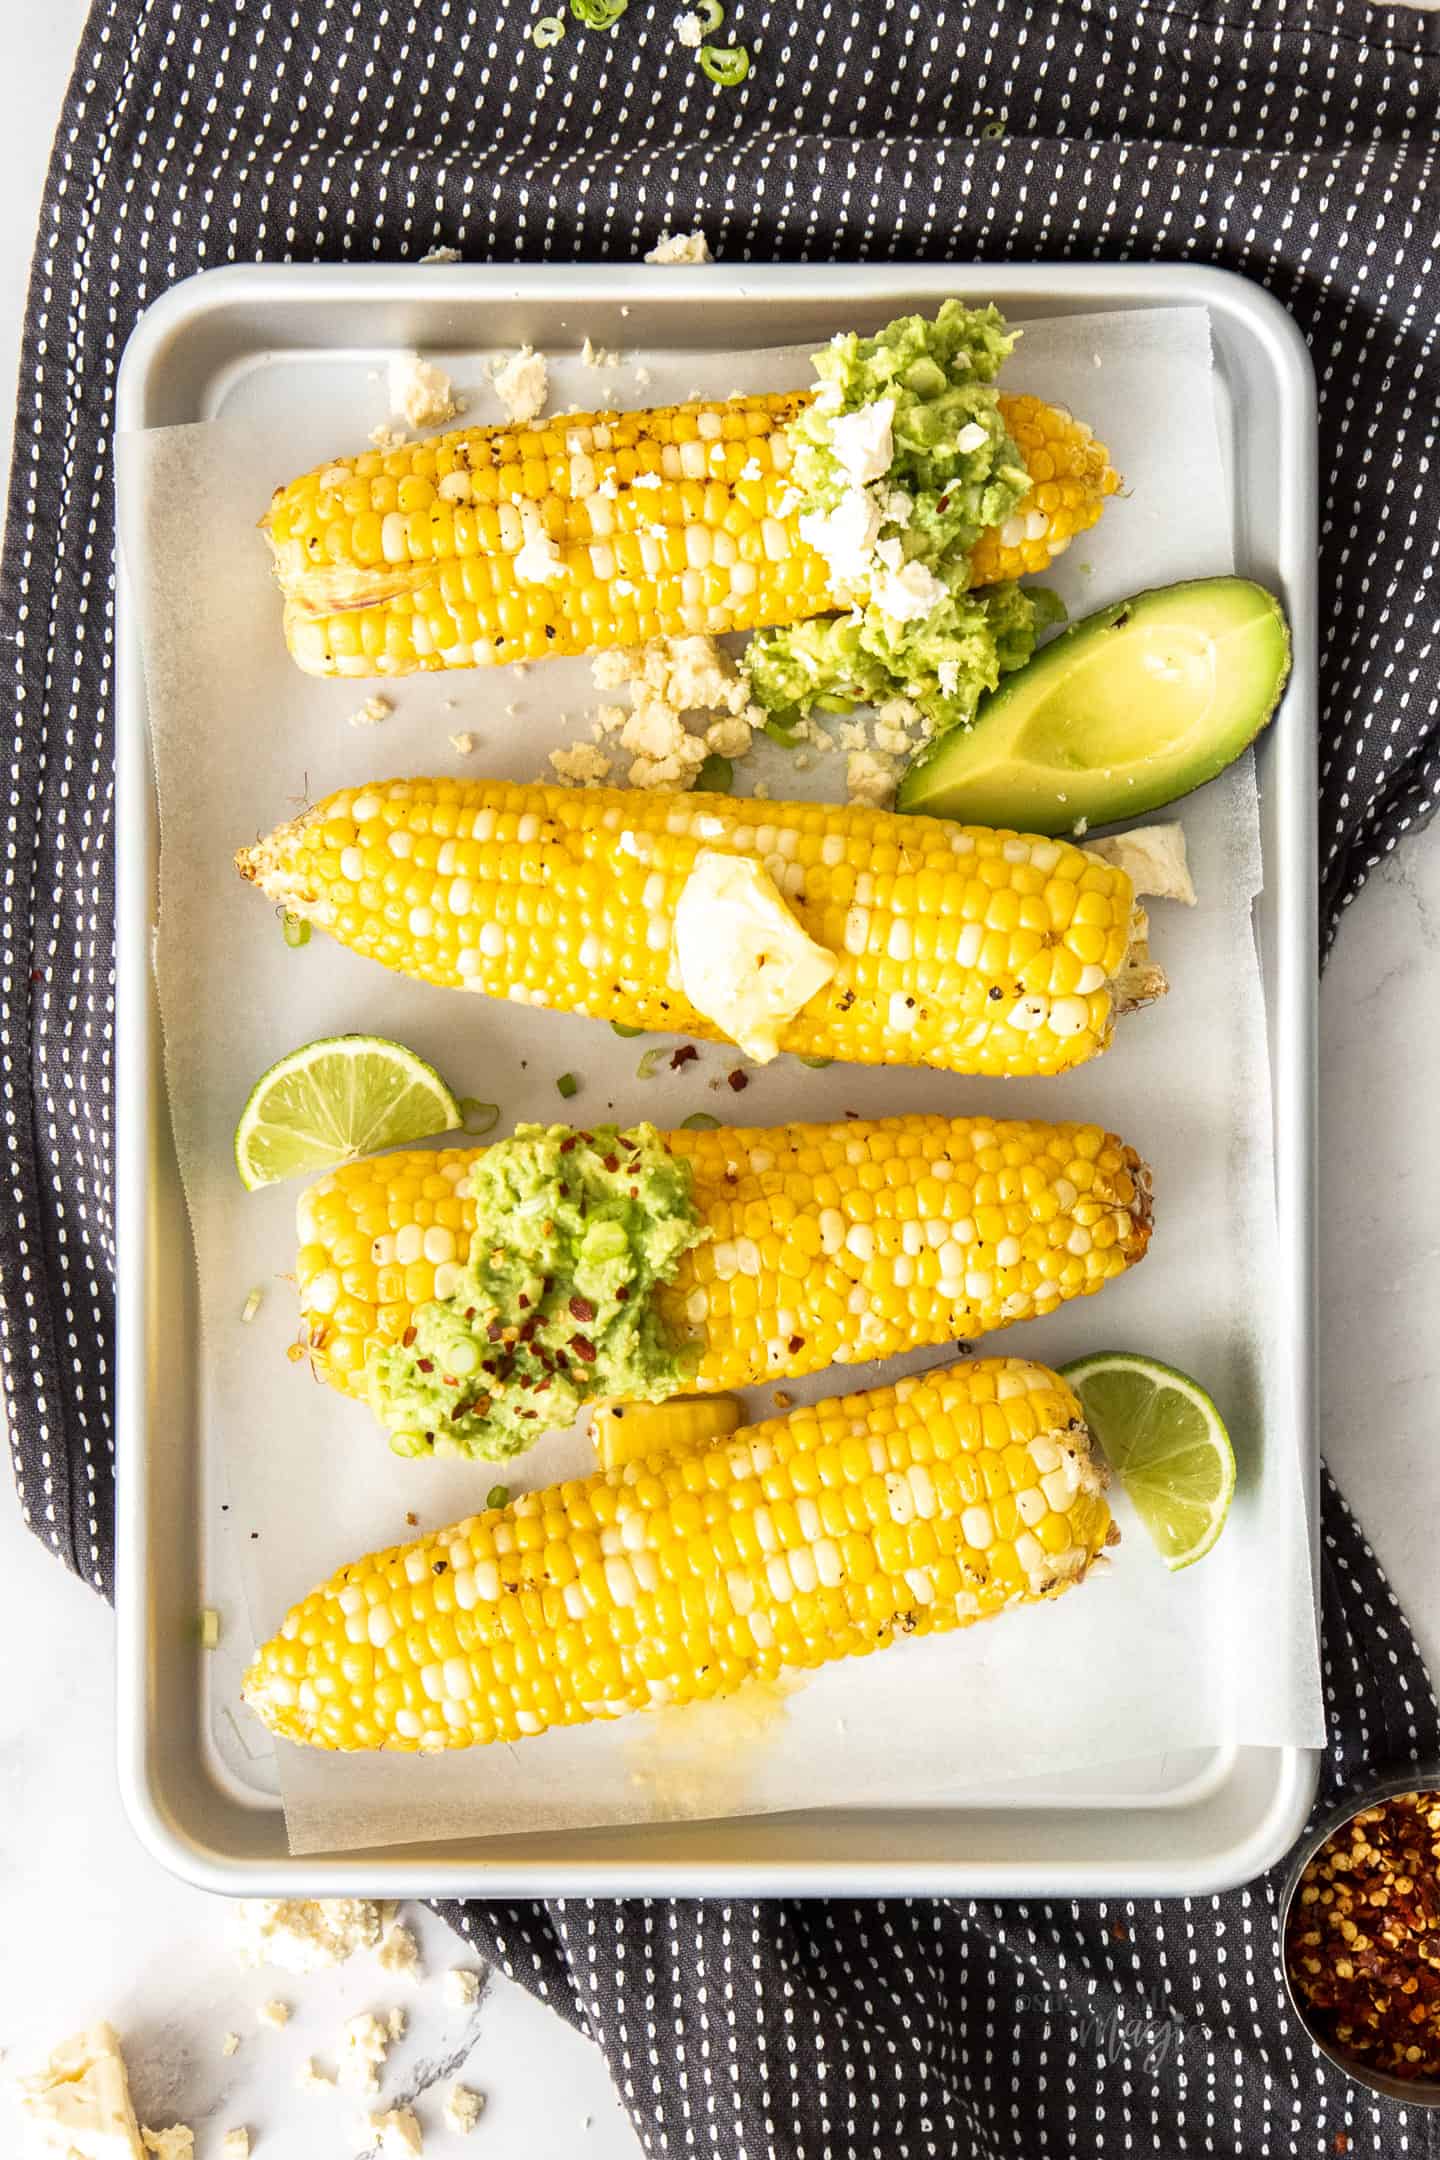 4 cobs of corn on a silver baking tray topped with butter and avocado.